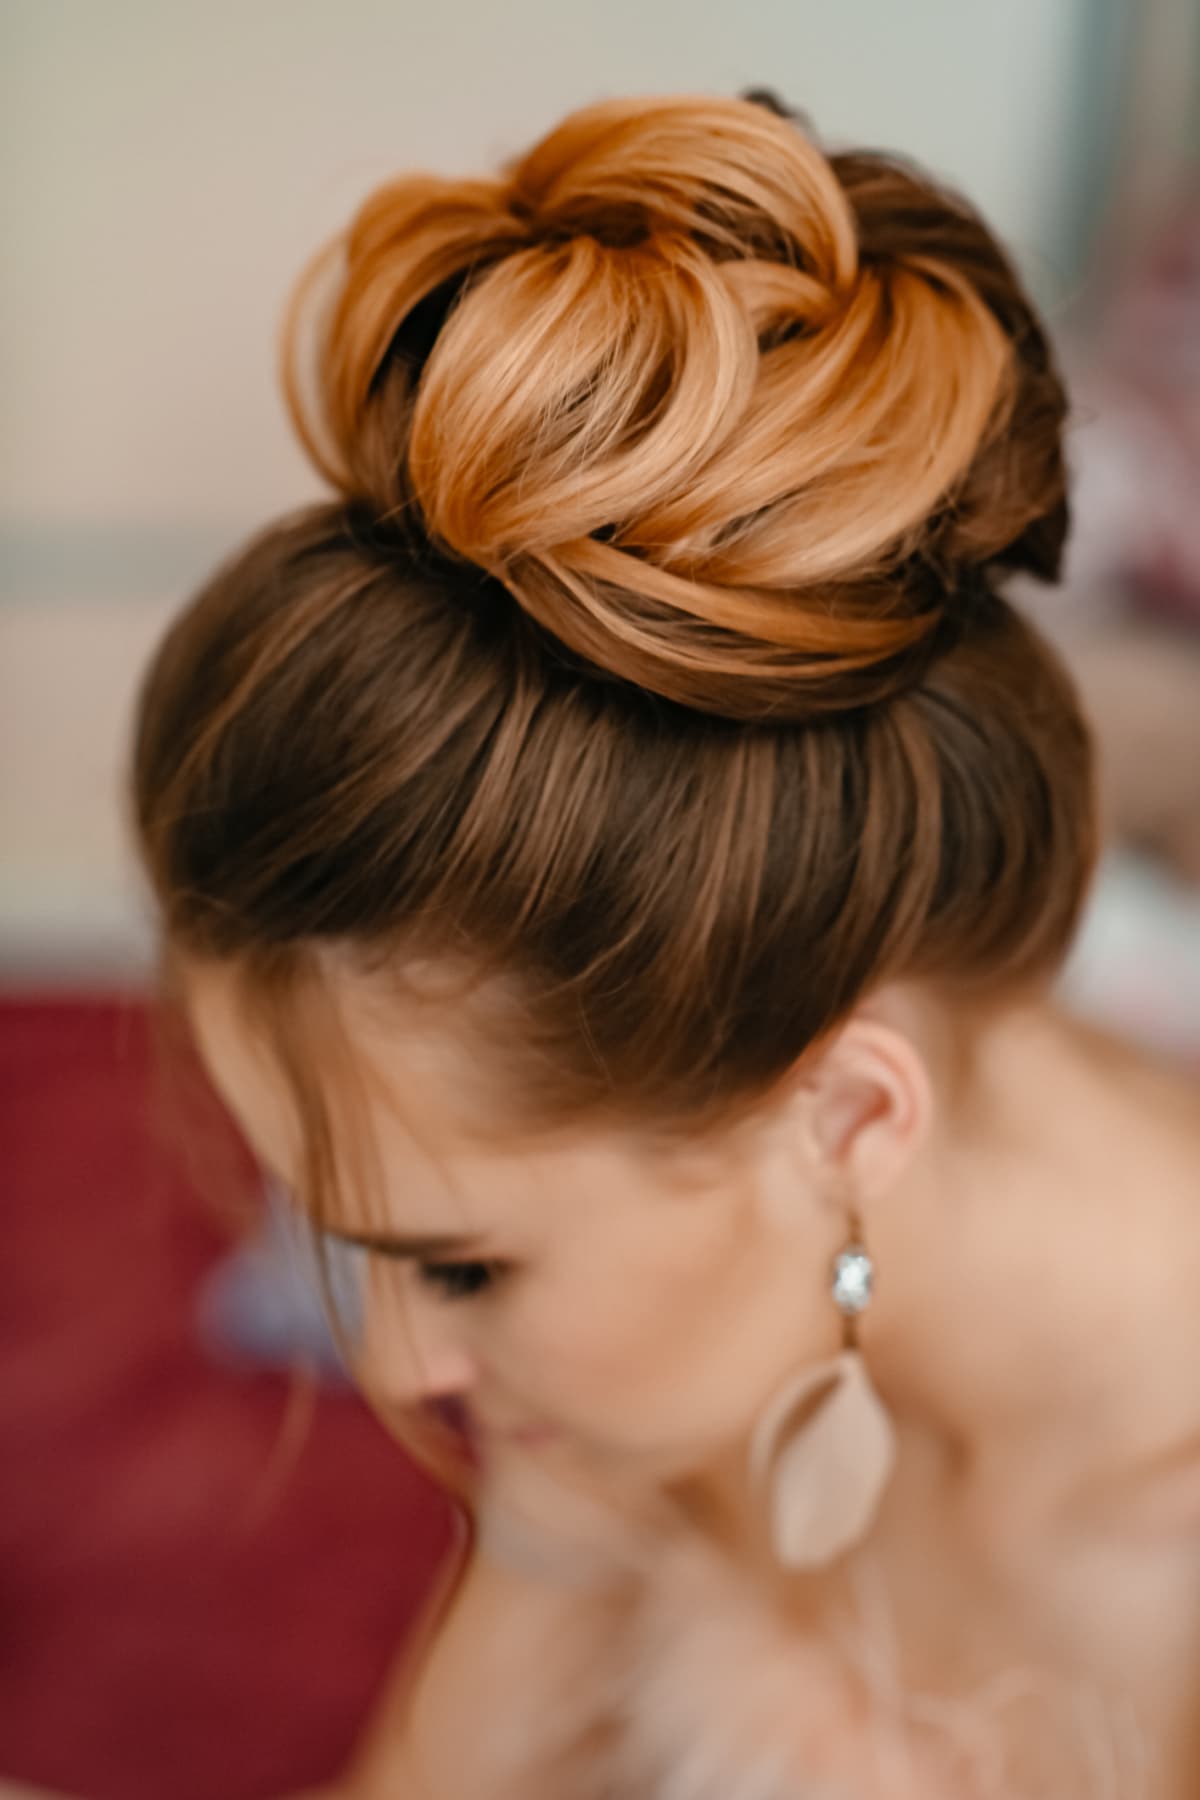 Top view of a young woman with a ballerina style inspired bun on top of her head